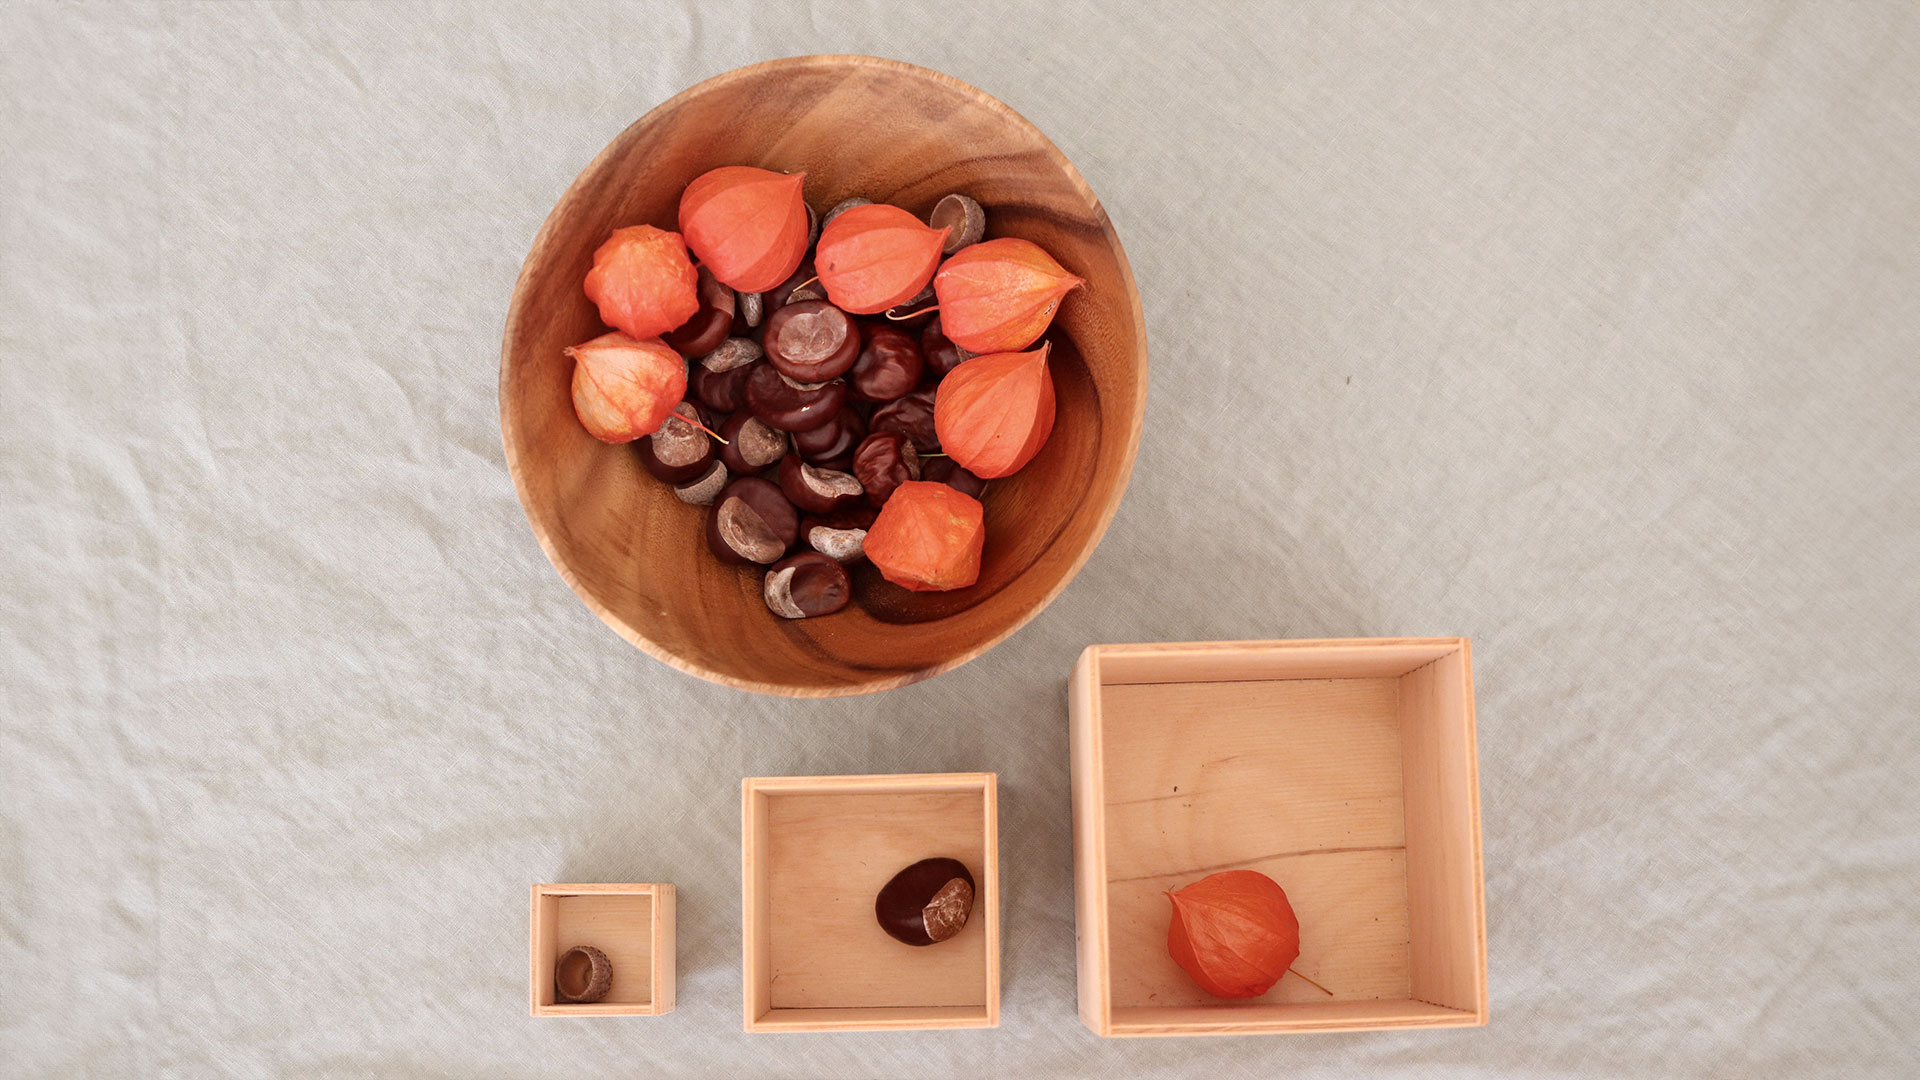 Three different sized wooden boxes and natural materials in three sizes on a table.